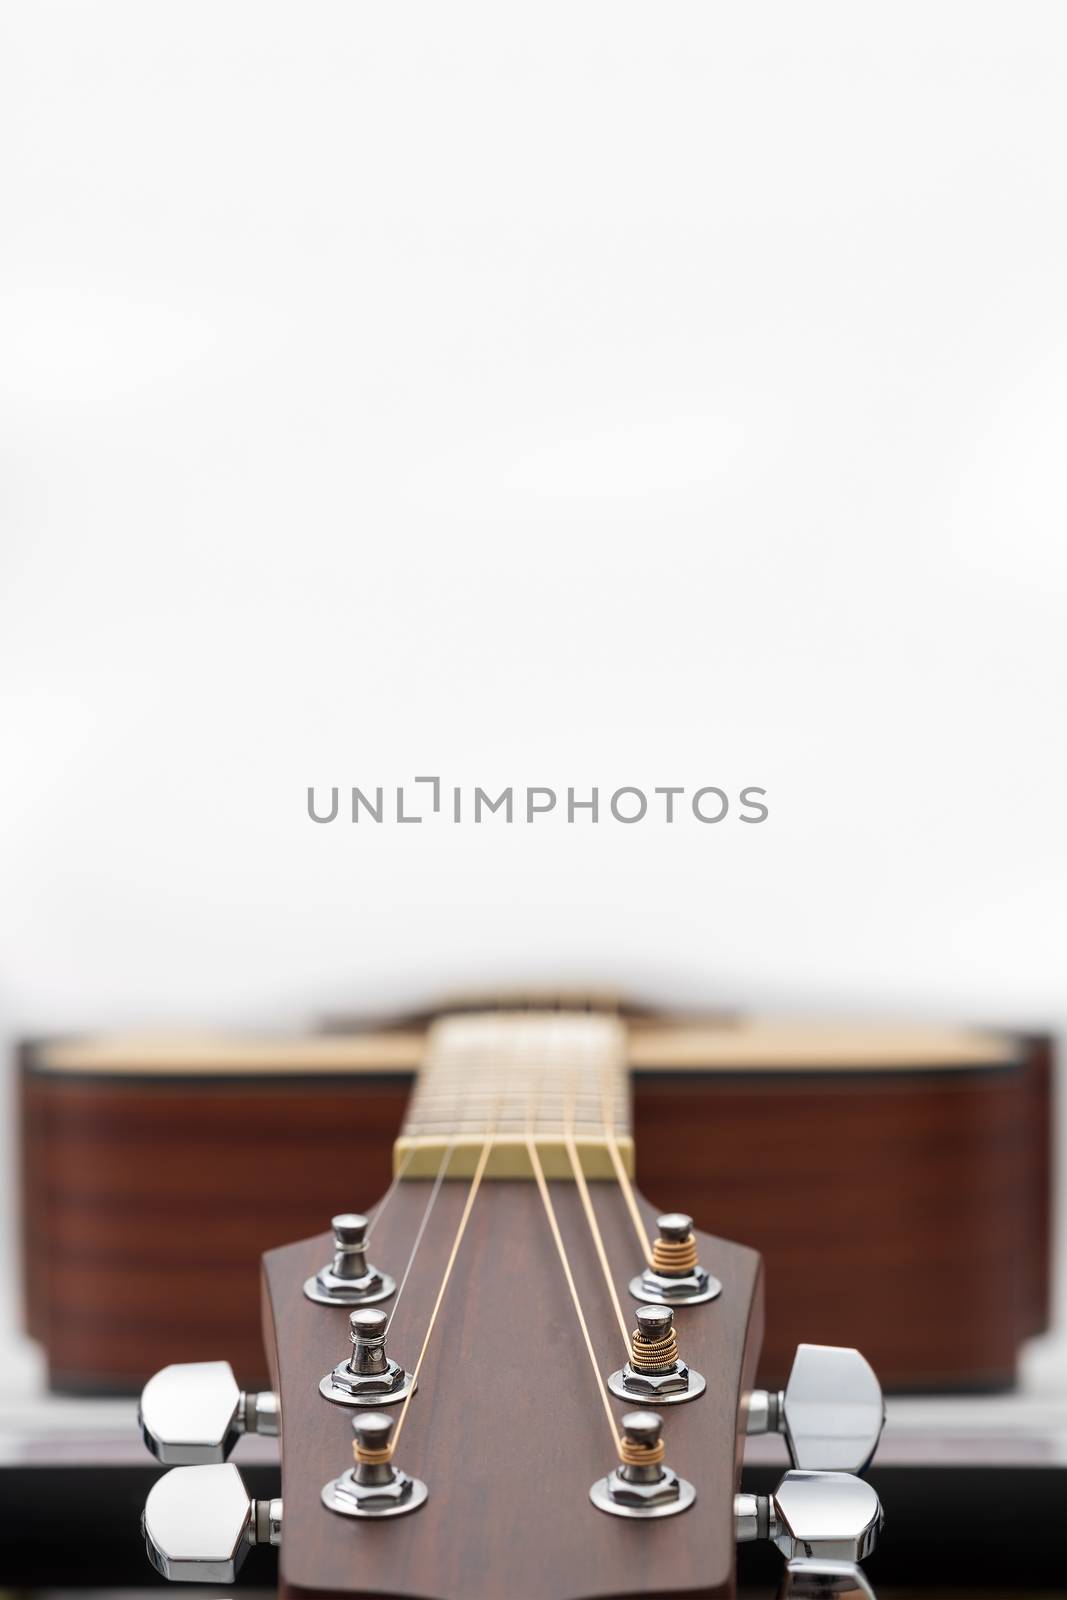 Close up of an acoustic guitar headstock on white background with copy space.